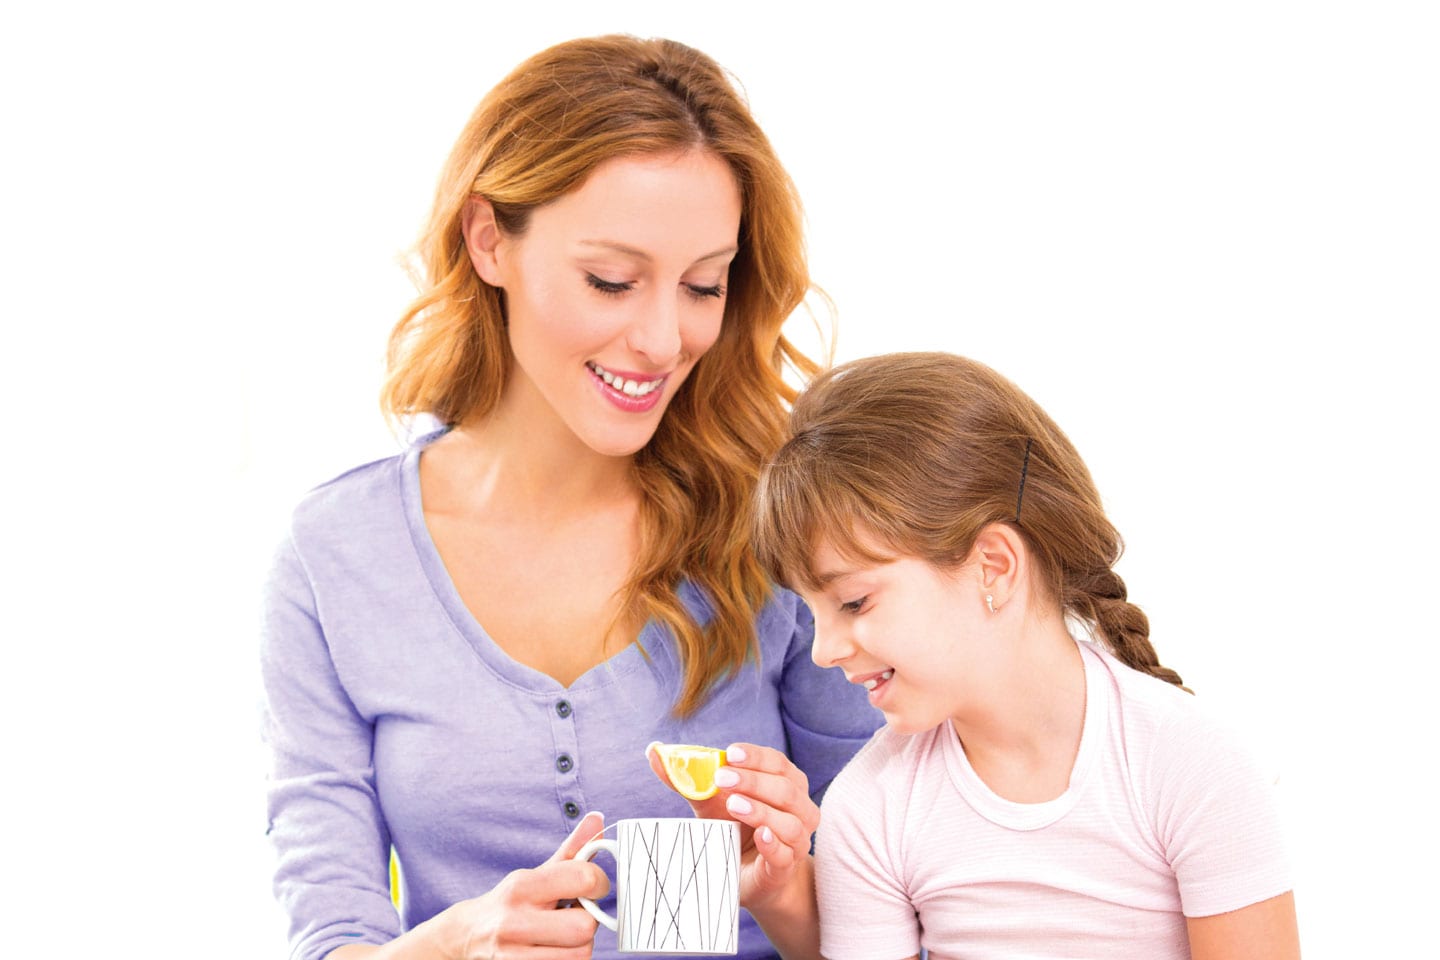 Mother squeezing lemon into cup for her young daughter